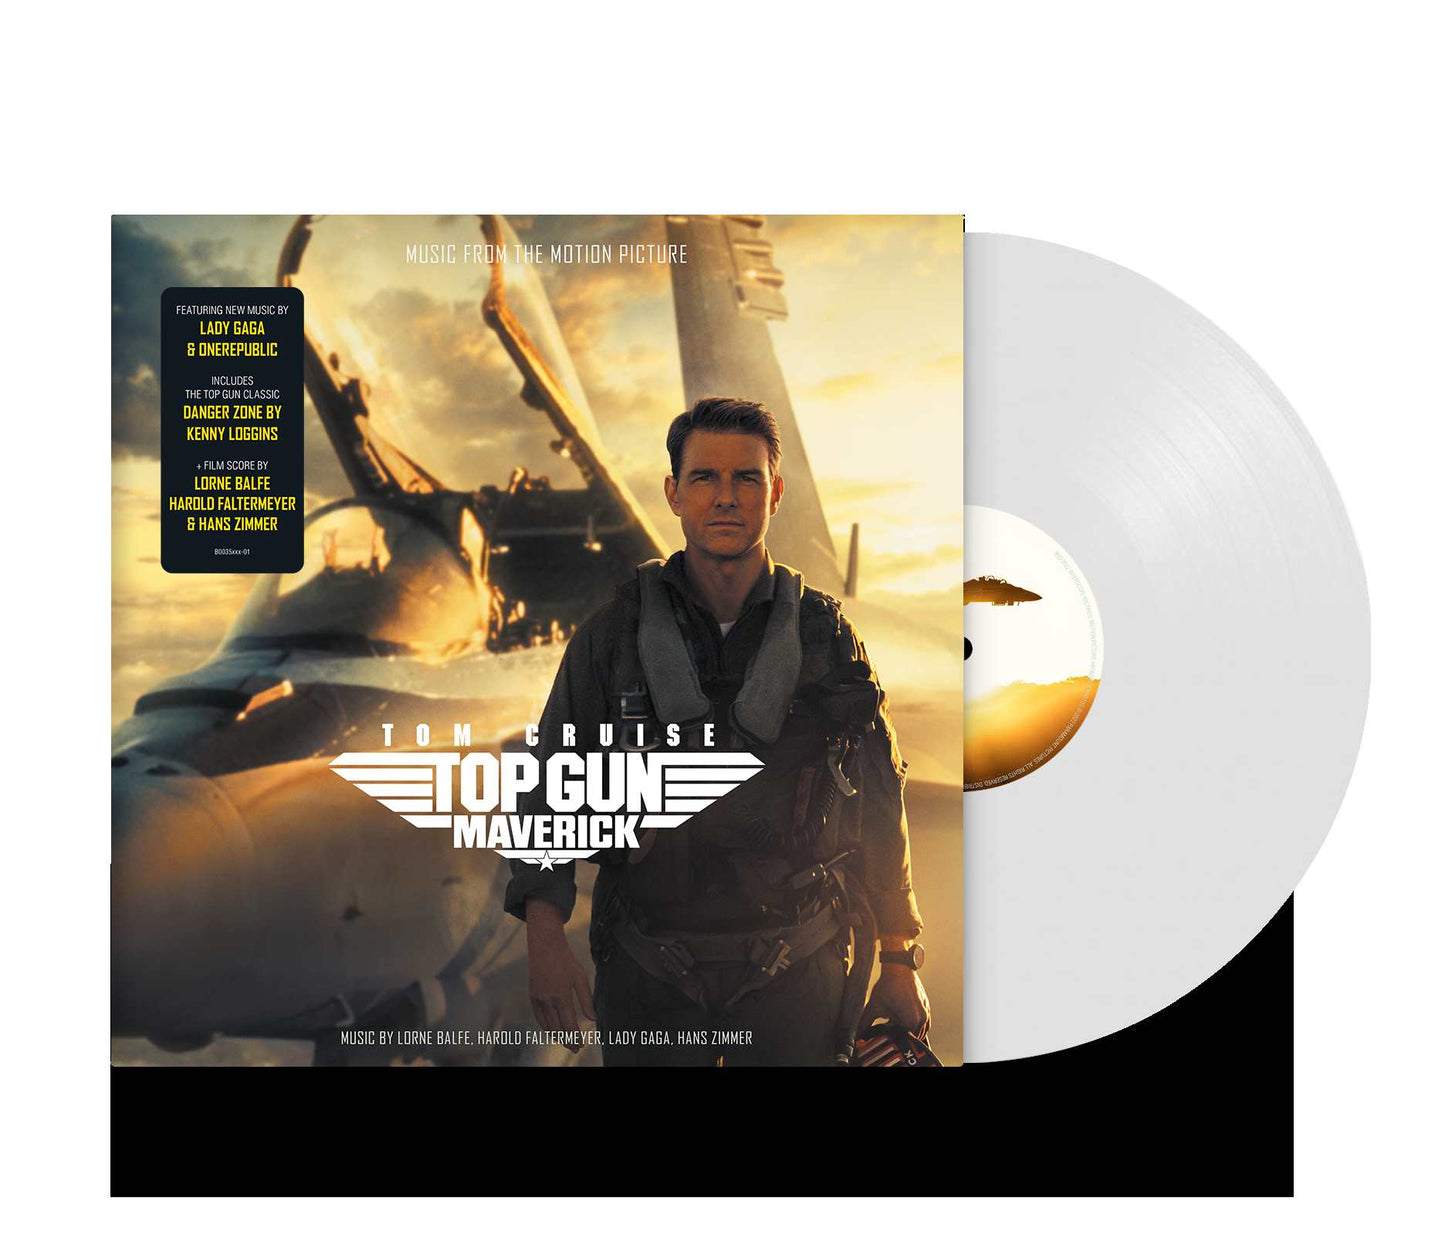 Lady Gaga, OneRepublic, Hans Zimmer - Top Gun: Maverick (Music From The Motion Picture) - The Vault Collective ltd